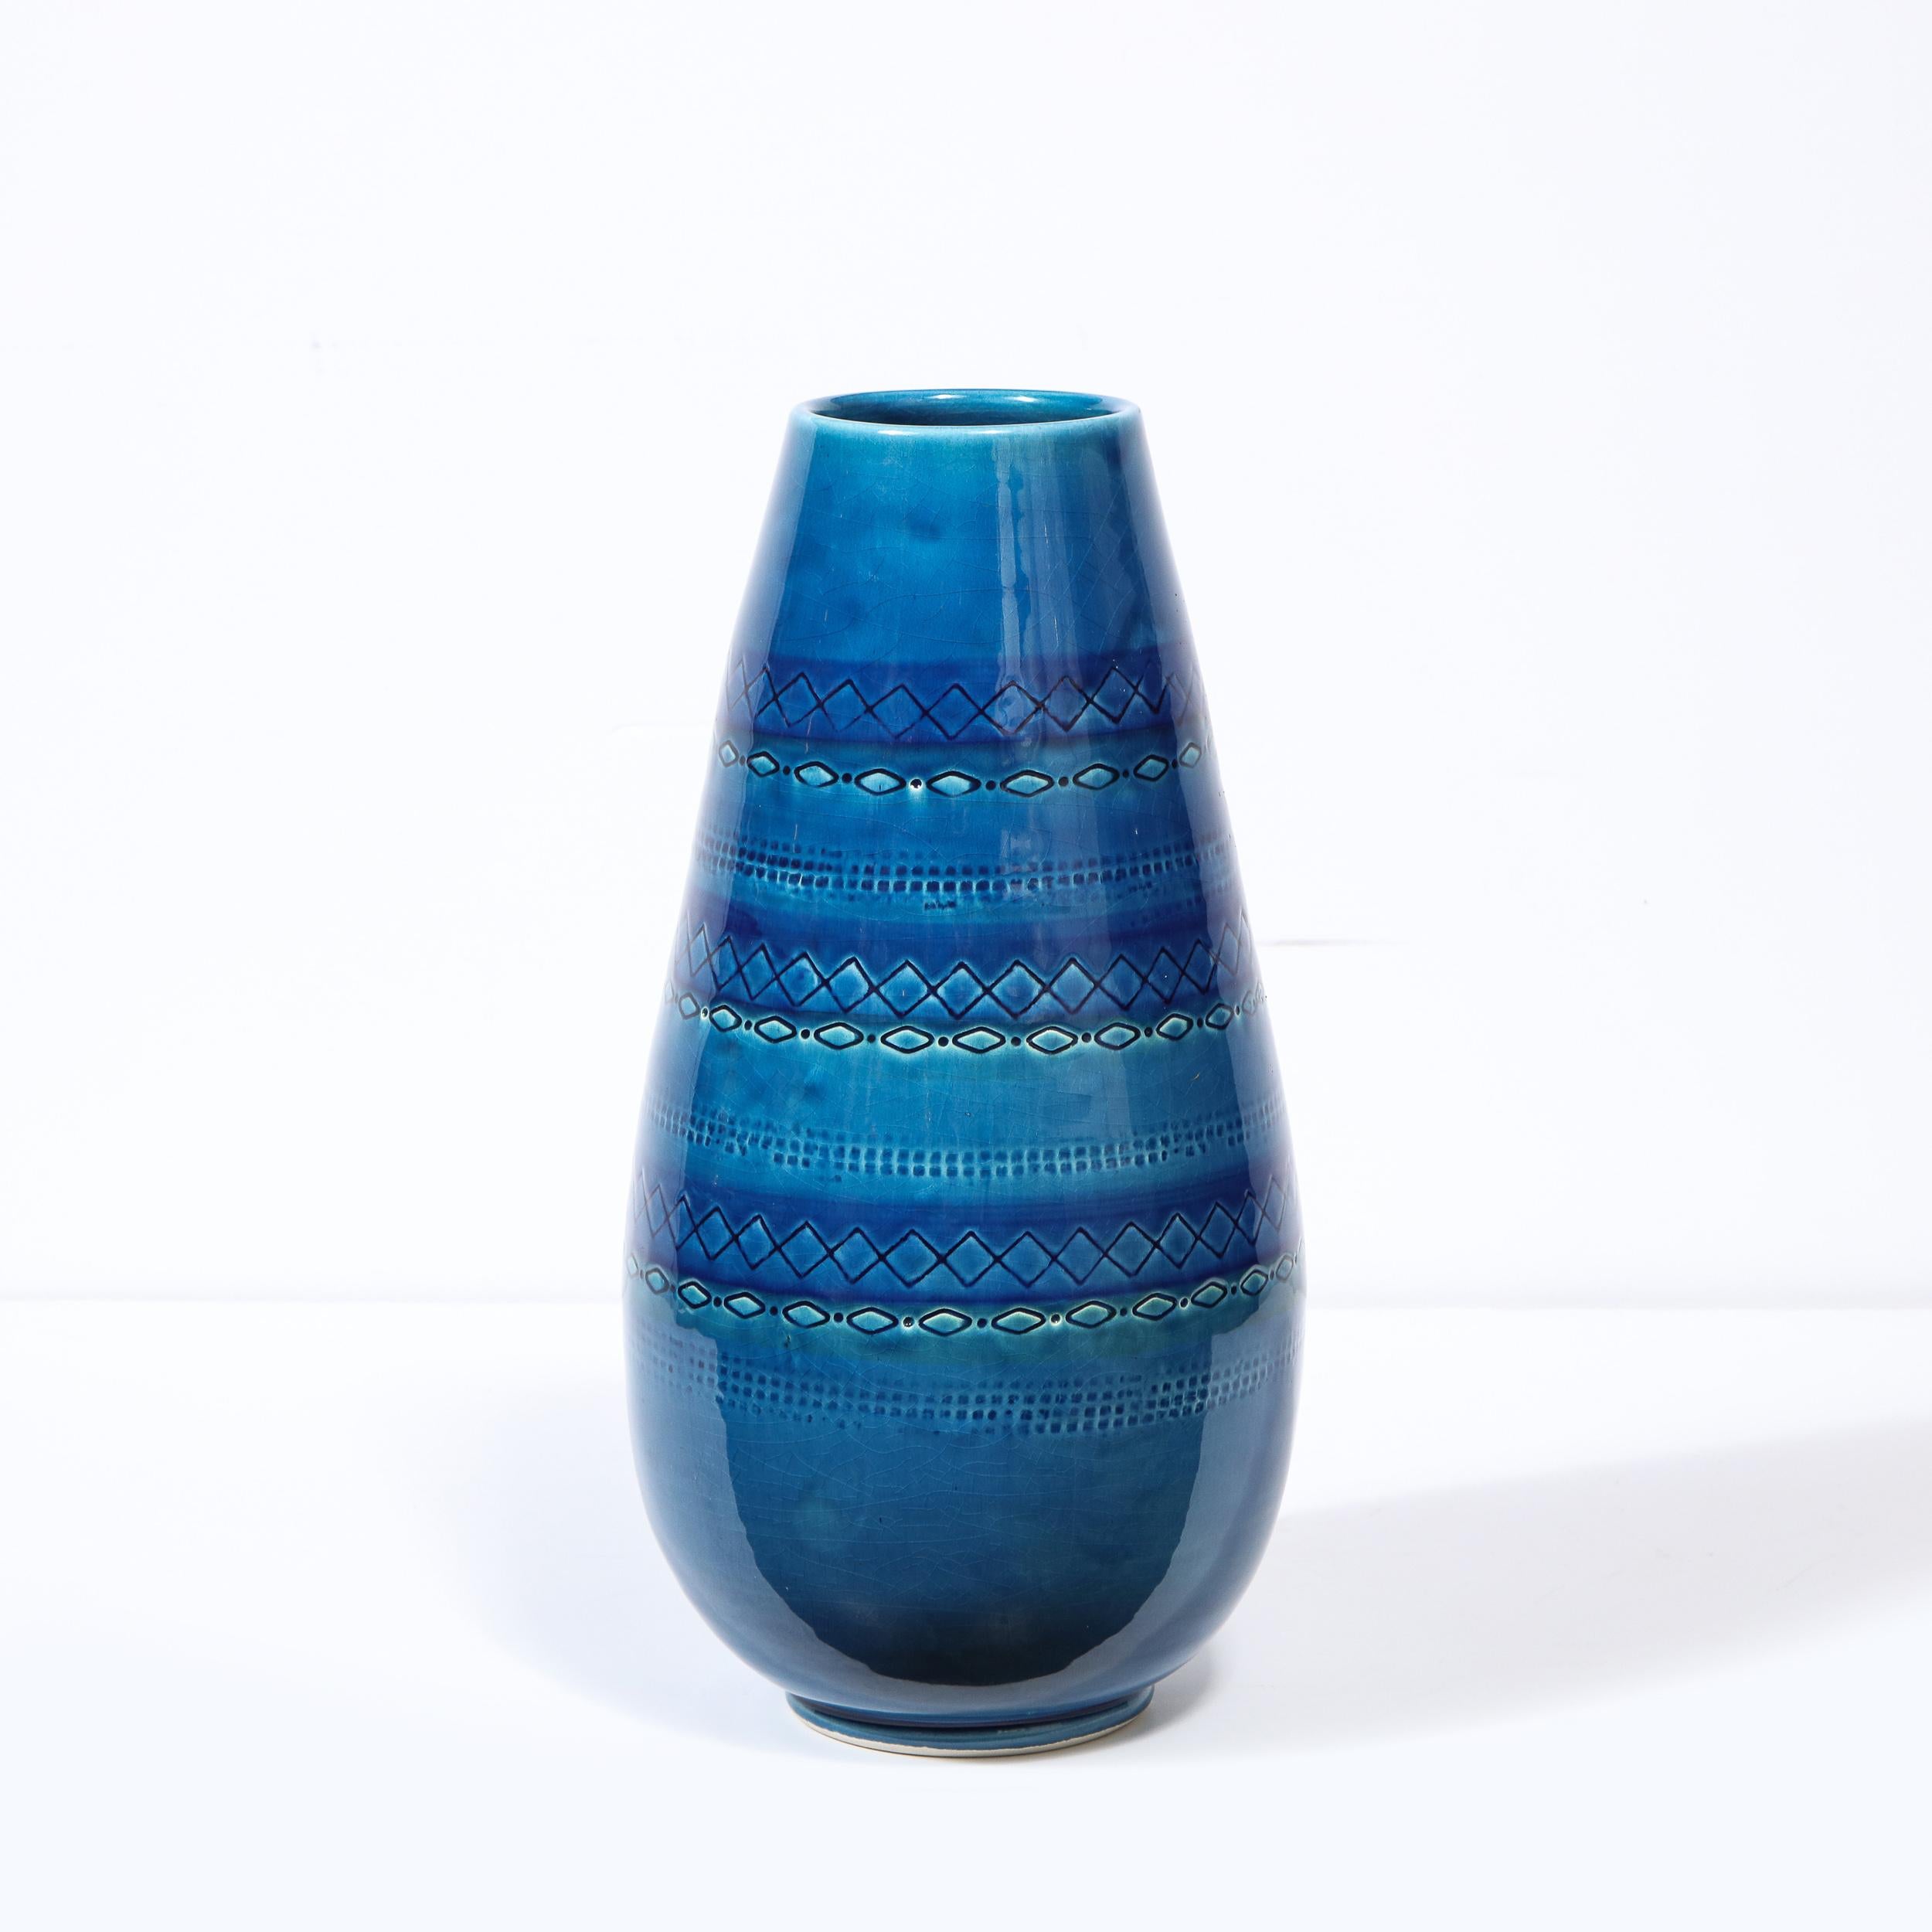 Mid-20th Century Mid-Century Modern Conical Azure Blue Ceramic Vase with Geometric Detailing